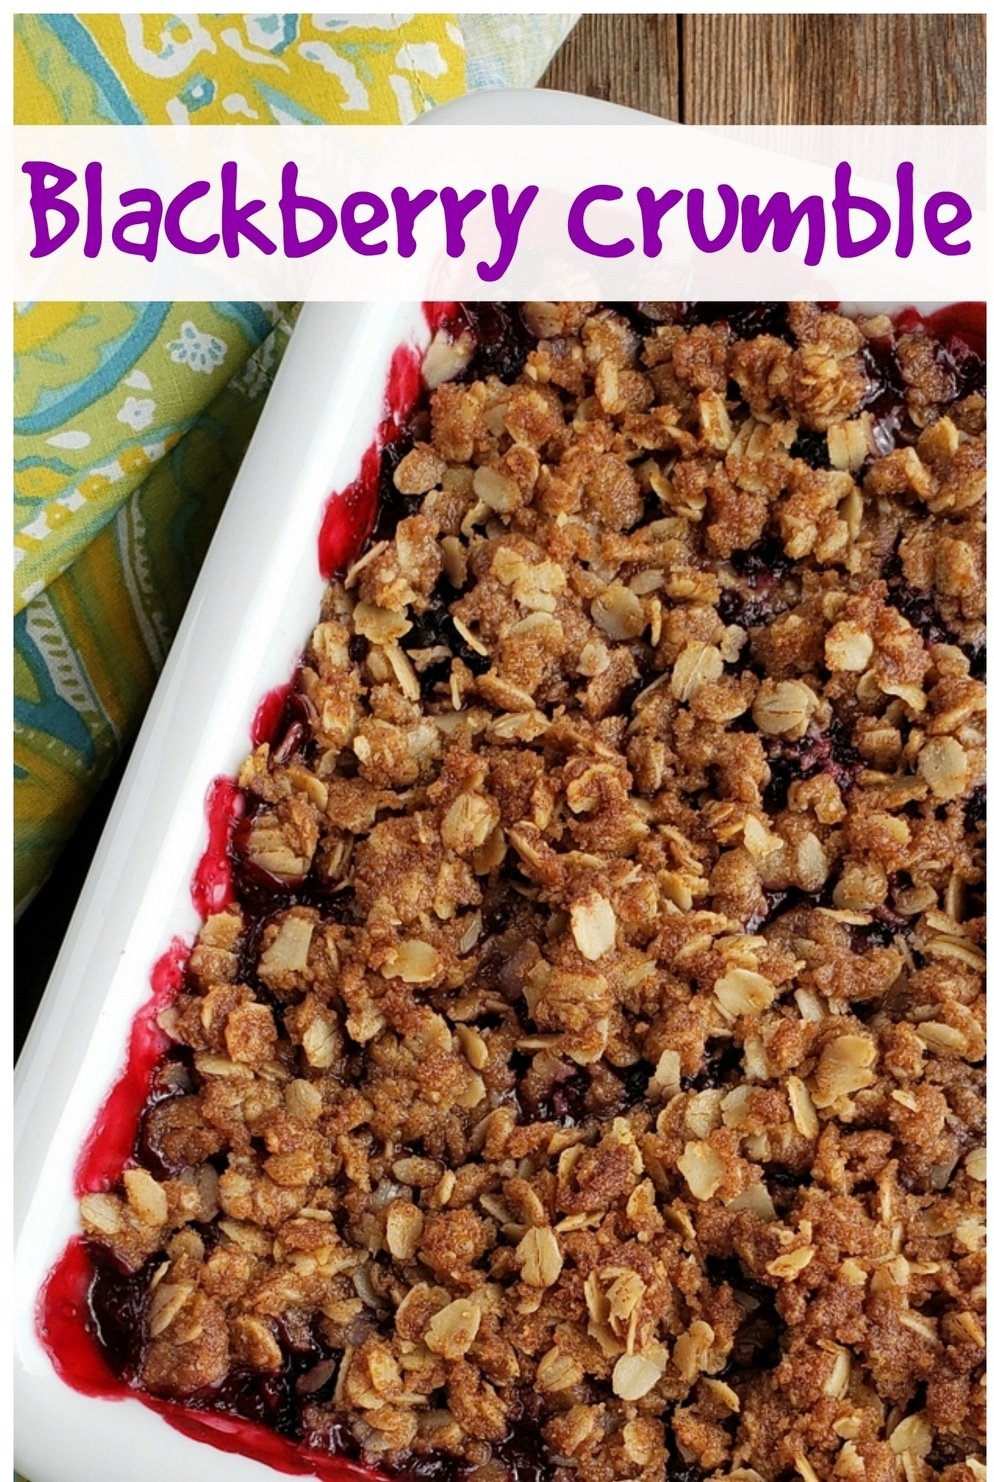 This blackberry crumble recipe is a crowd-pleaser. Enjoy the warm and comforting flavors of blackberries and a crispy crumble topping. via @cmpollak1